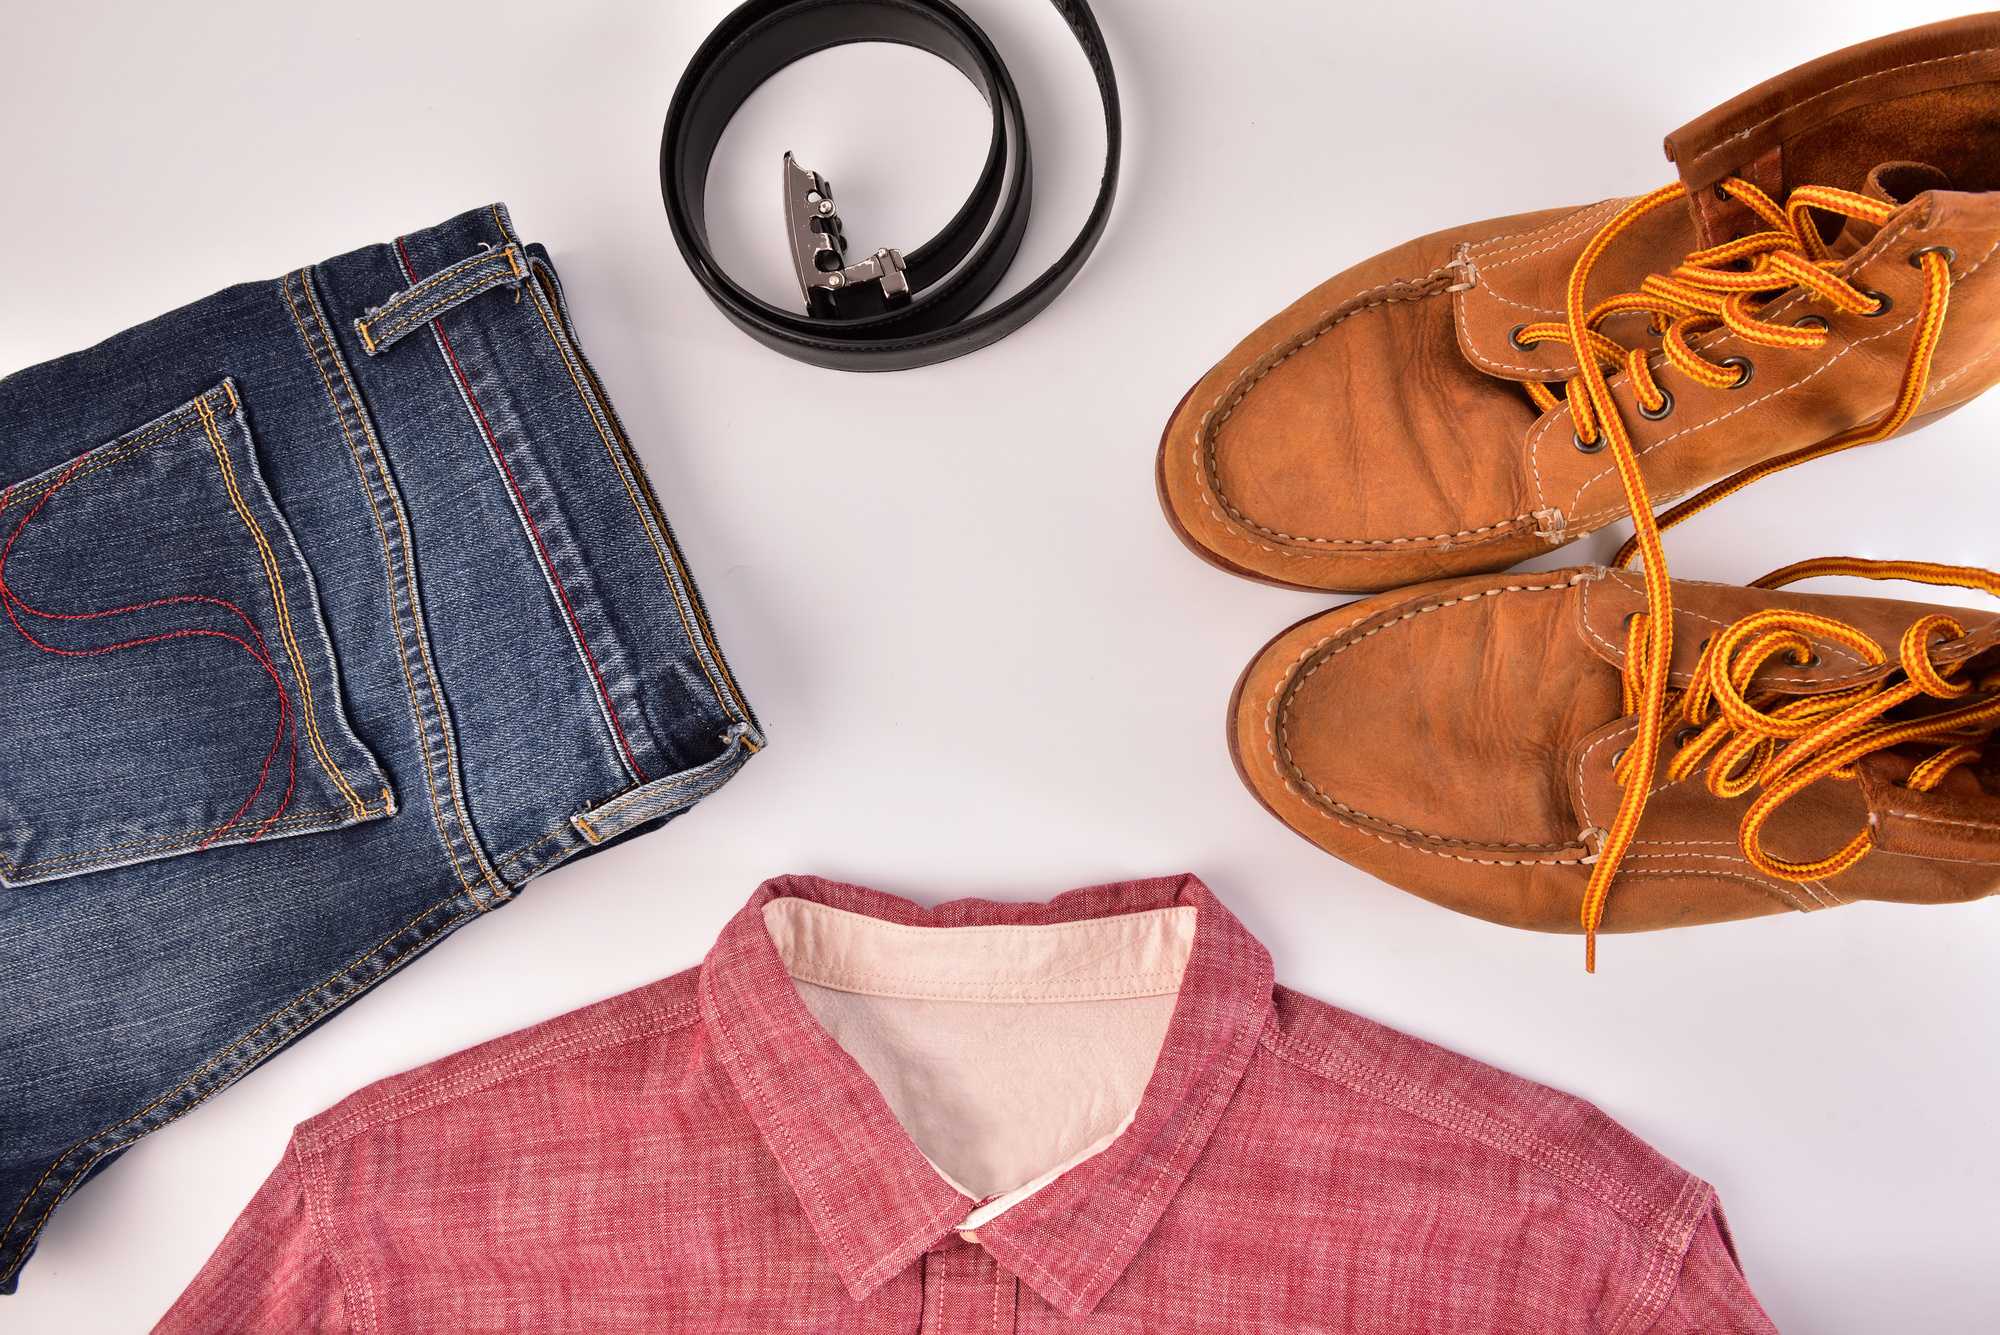 Looking Sharp! 10 Men's Fashion Trends to Feature on Social Media ...